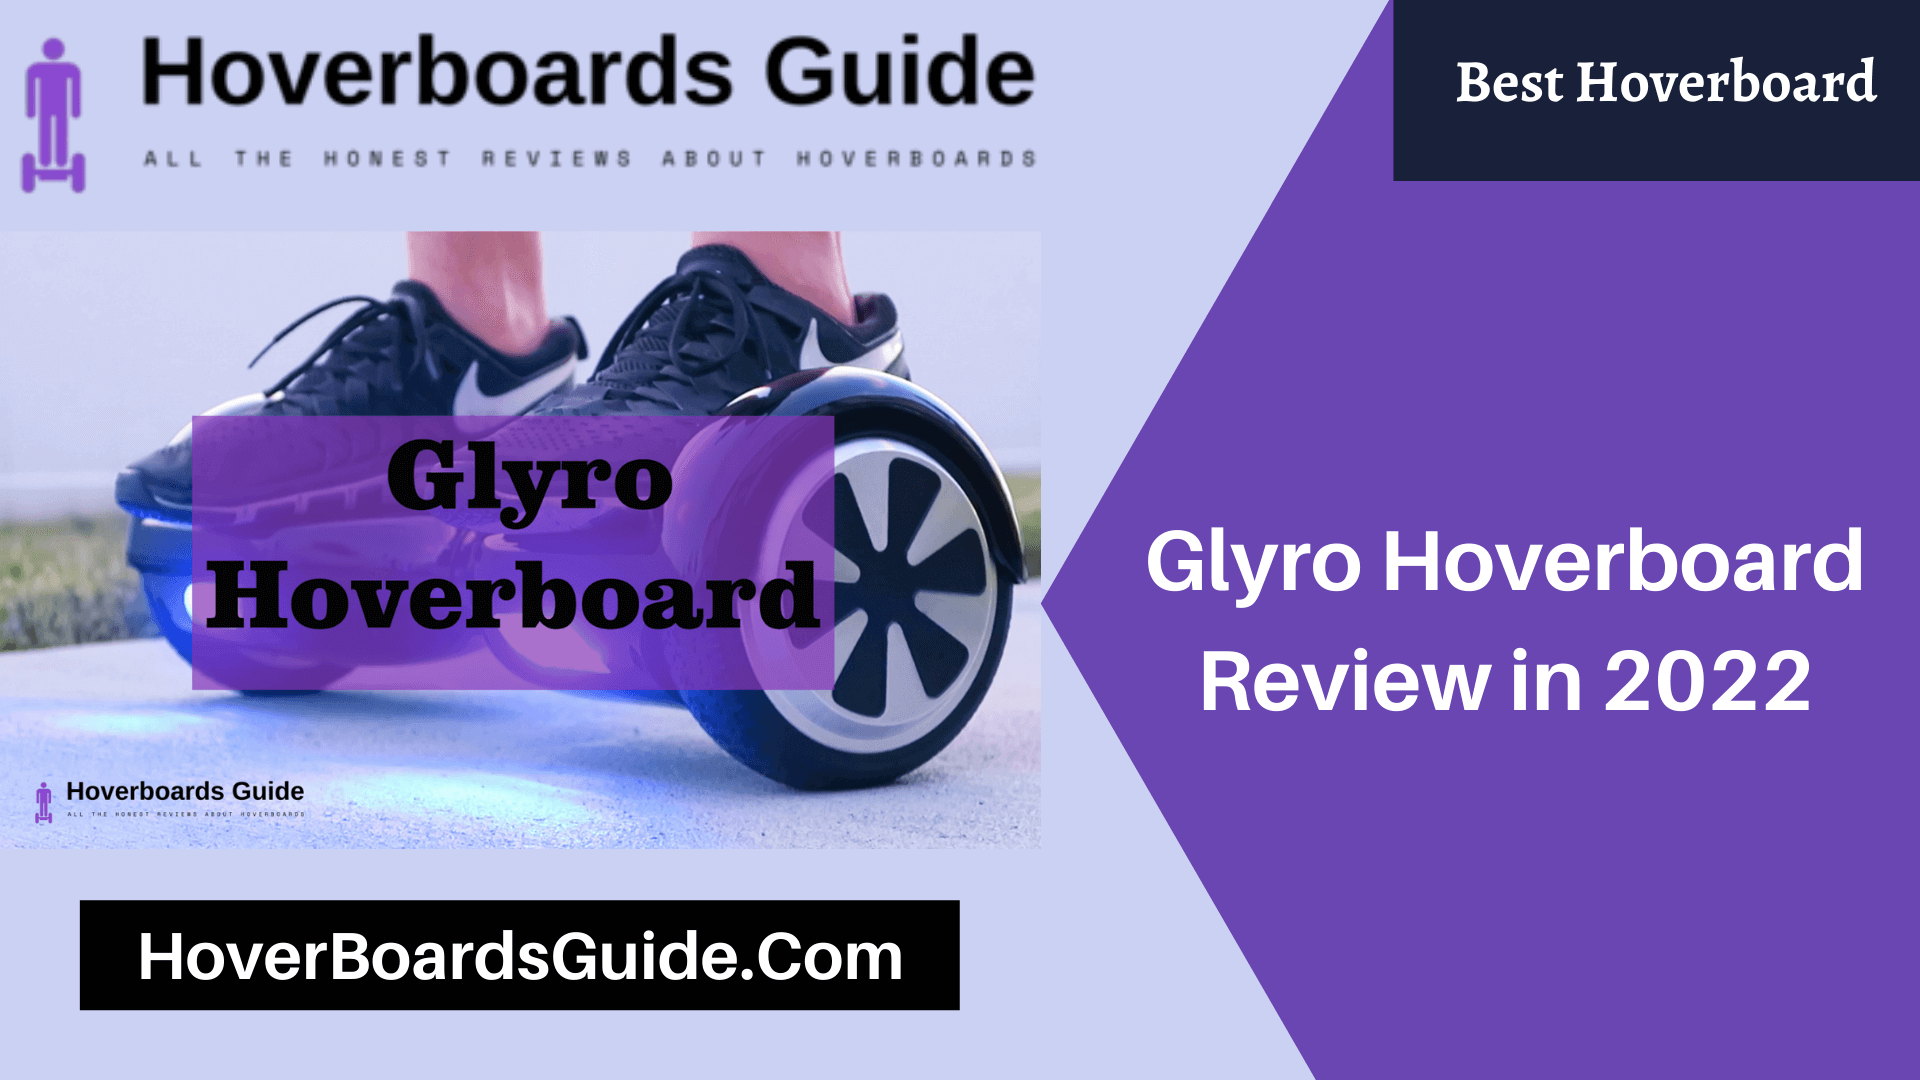 Glyro Hoverboard Review in 2022